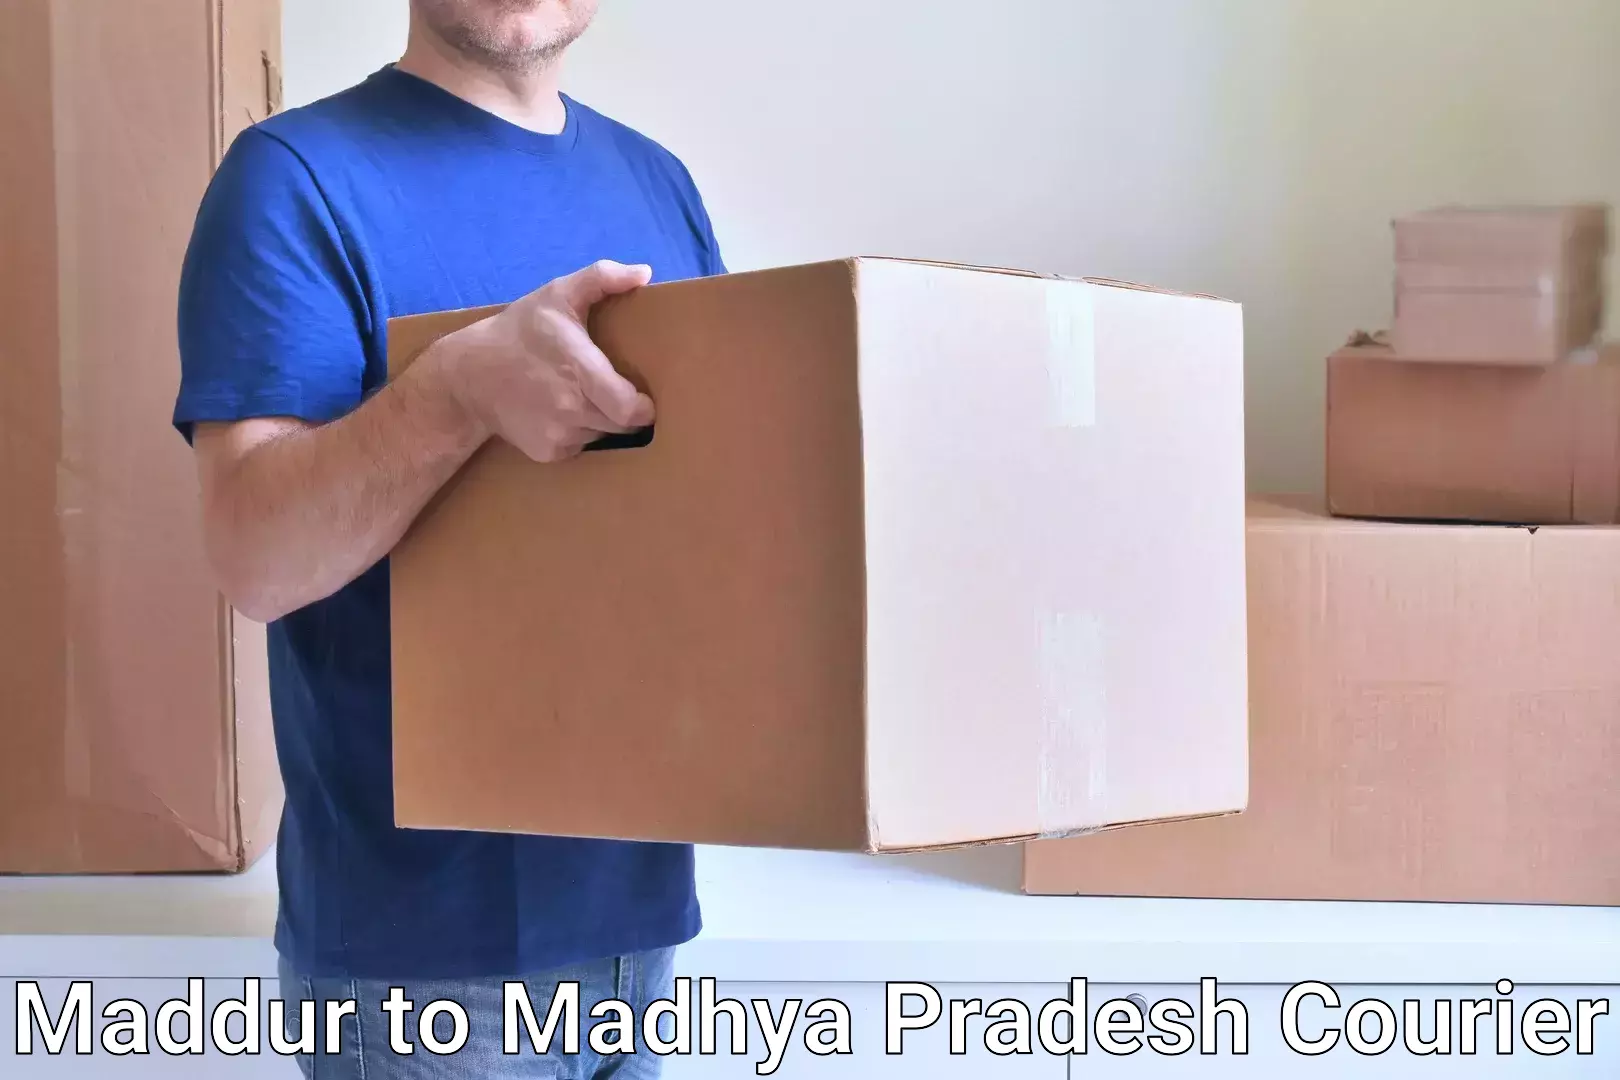 Urban courier service Maddur to Athner